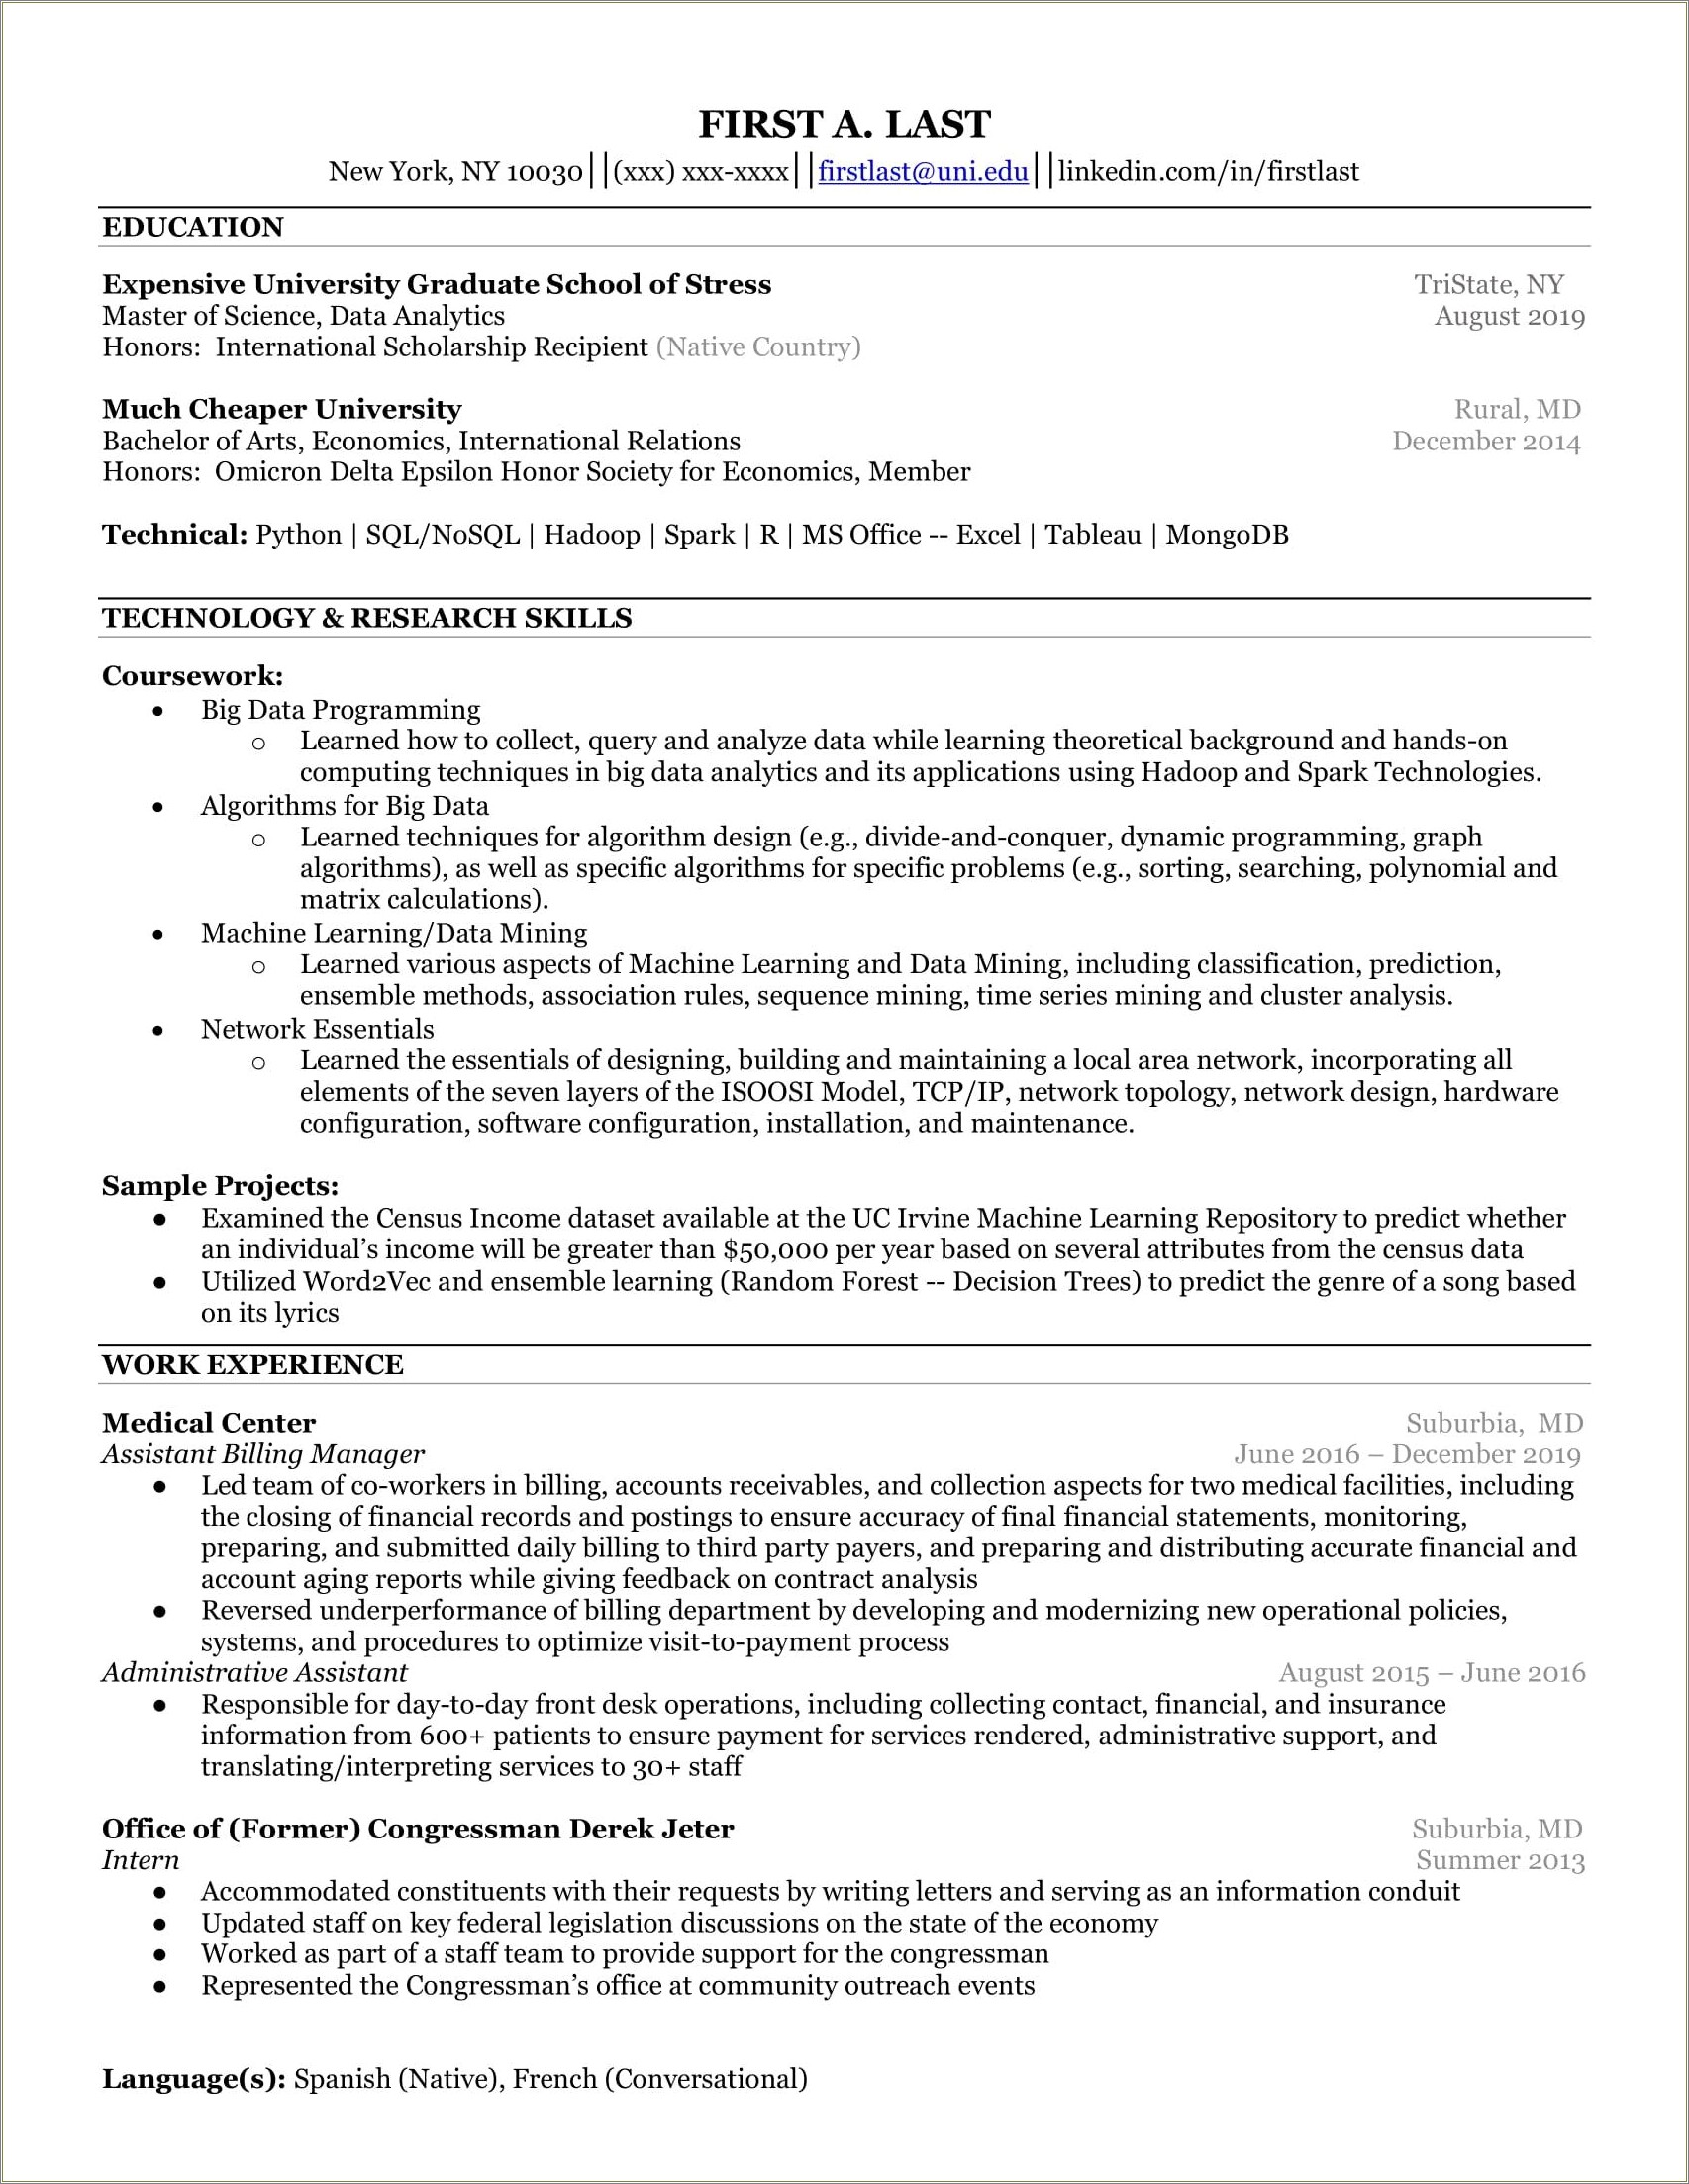 Resume With No Related Work Experience